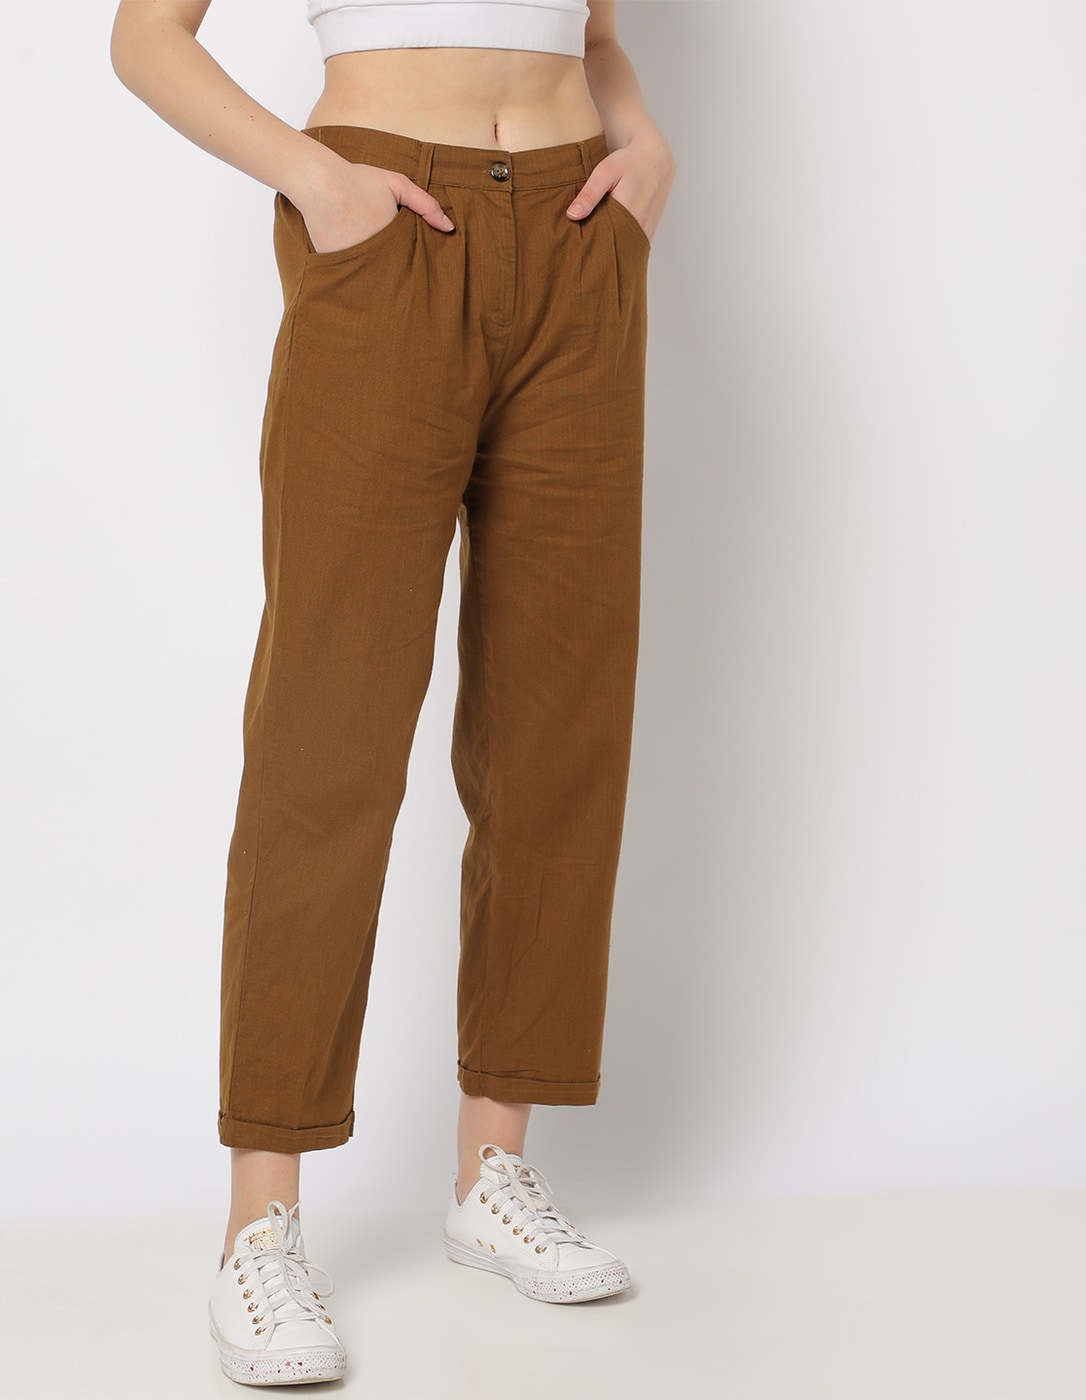 Enamor Essentials E014 Womens Cotton Lounge Pants  Ginger Melange Buy  Enamor Essentials E014 Womens Cotton Lounge Pants  Ginger Melange Online  at Best Price in India  Nykaa